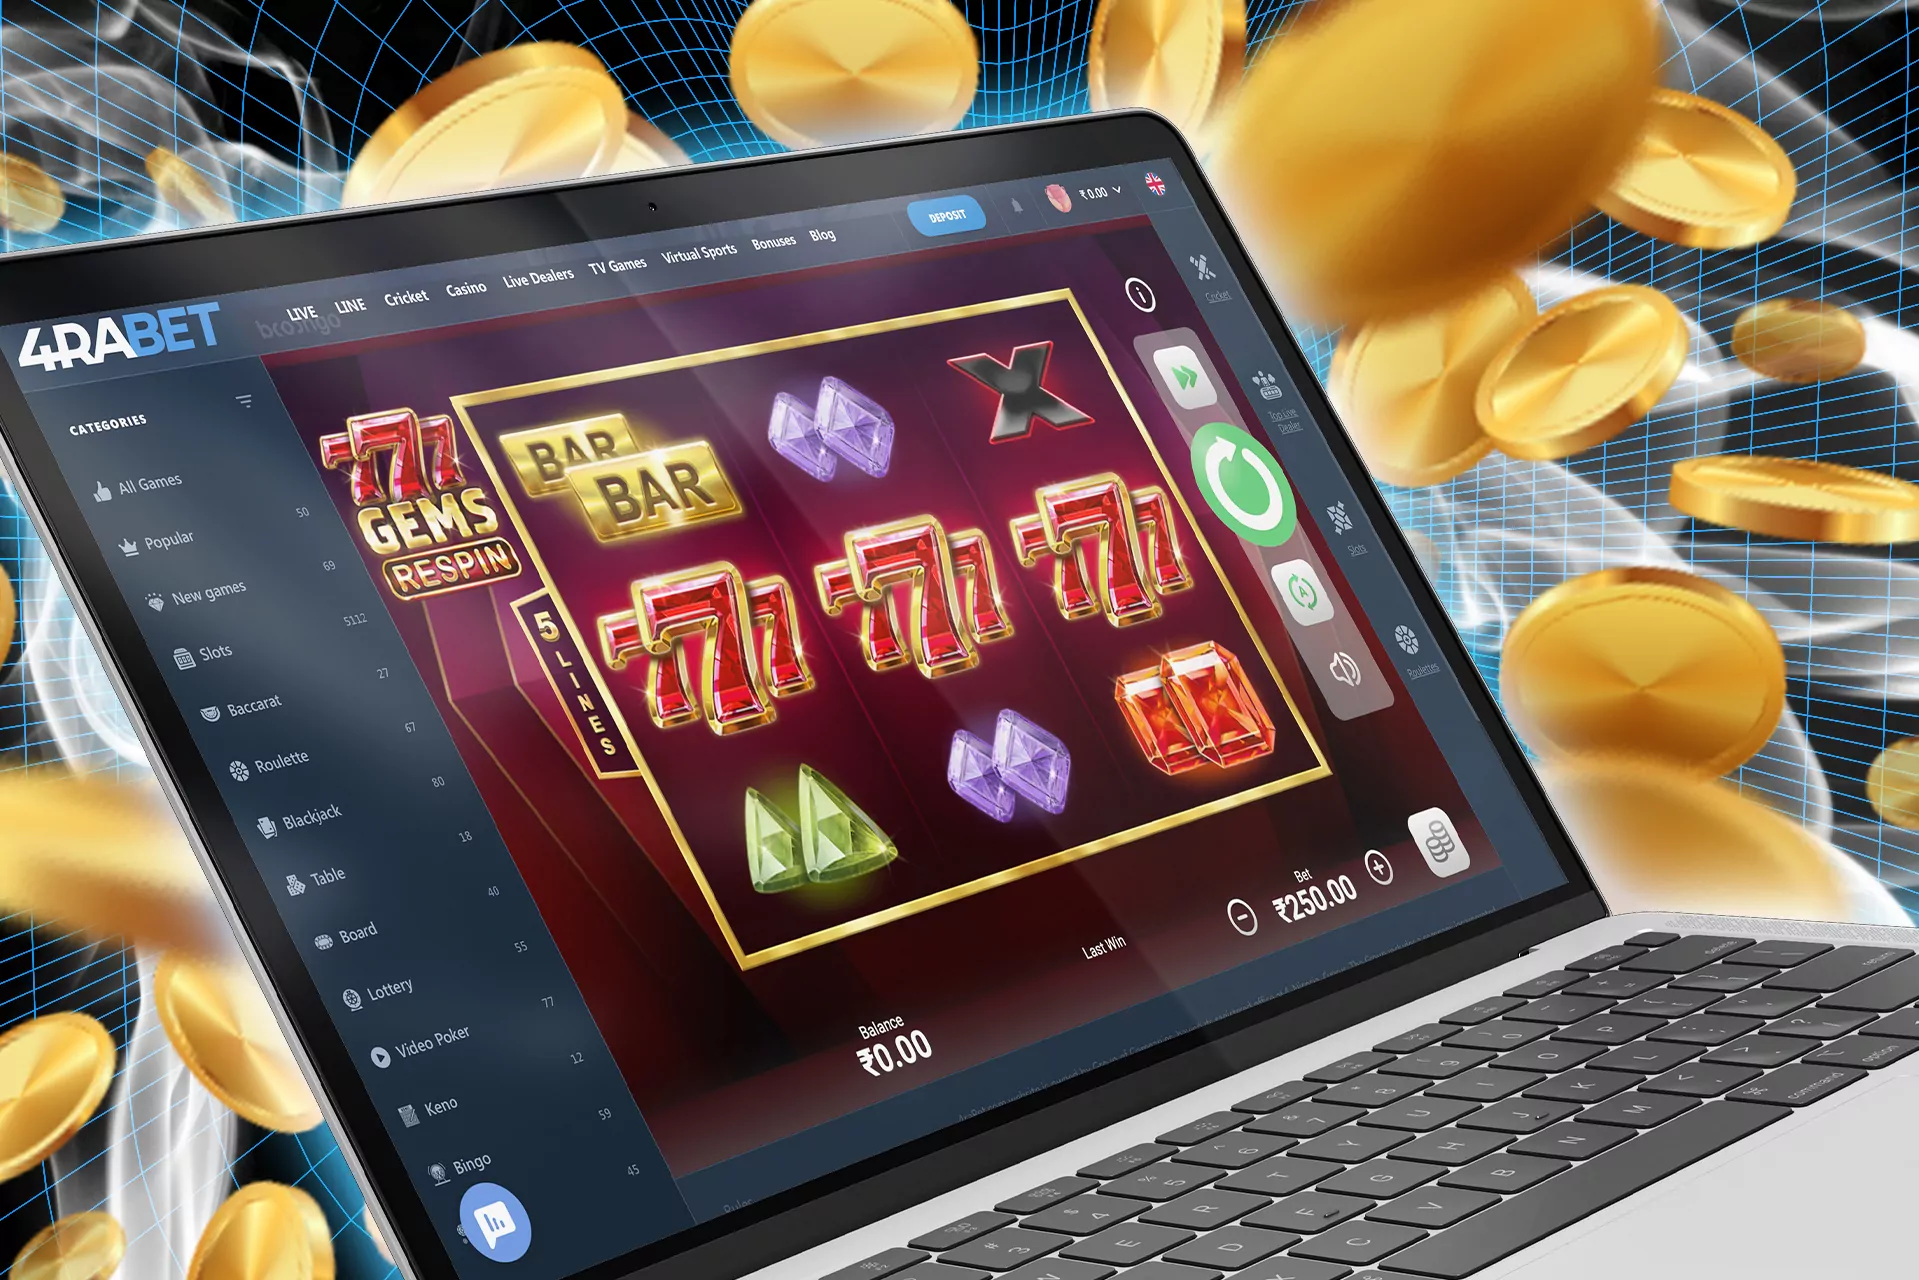 777 slots are ranked among the most popular casino games in 4Rabet.